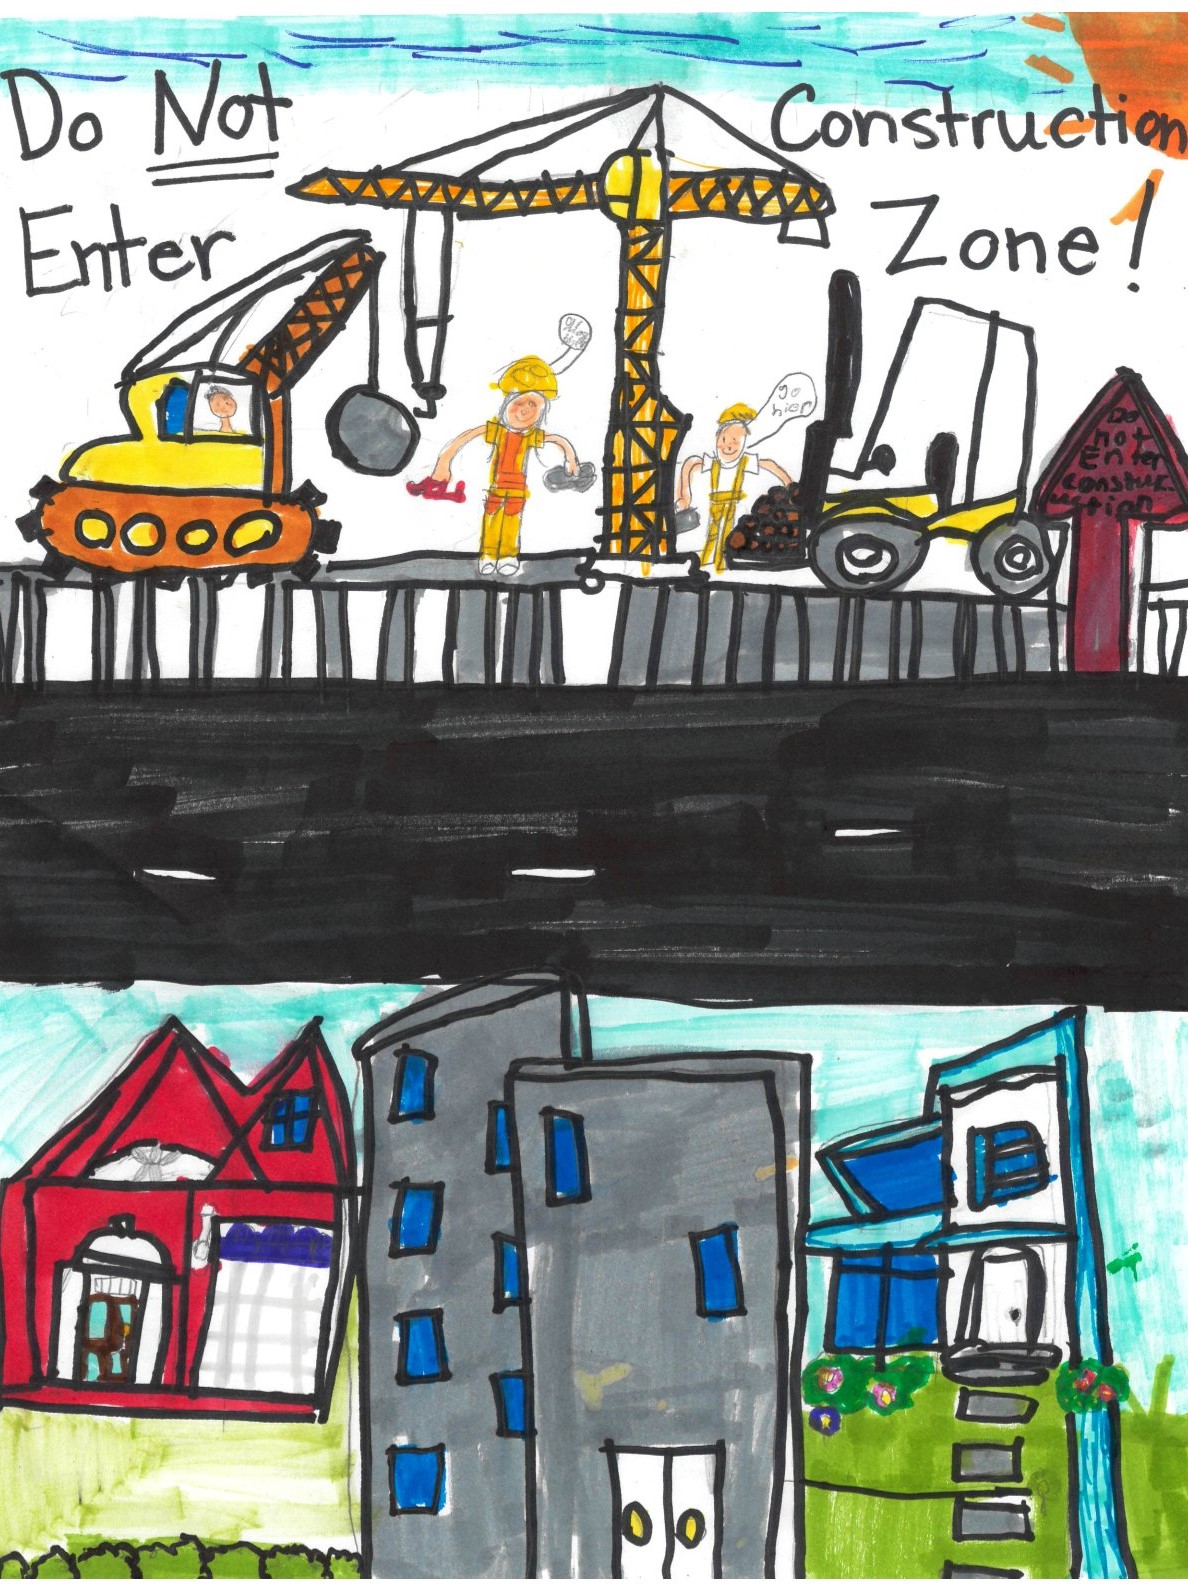 Drawing from a student showing a construction site near houses saying "Do not enter, construction zone!"